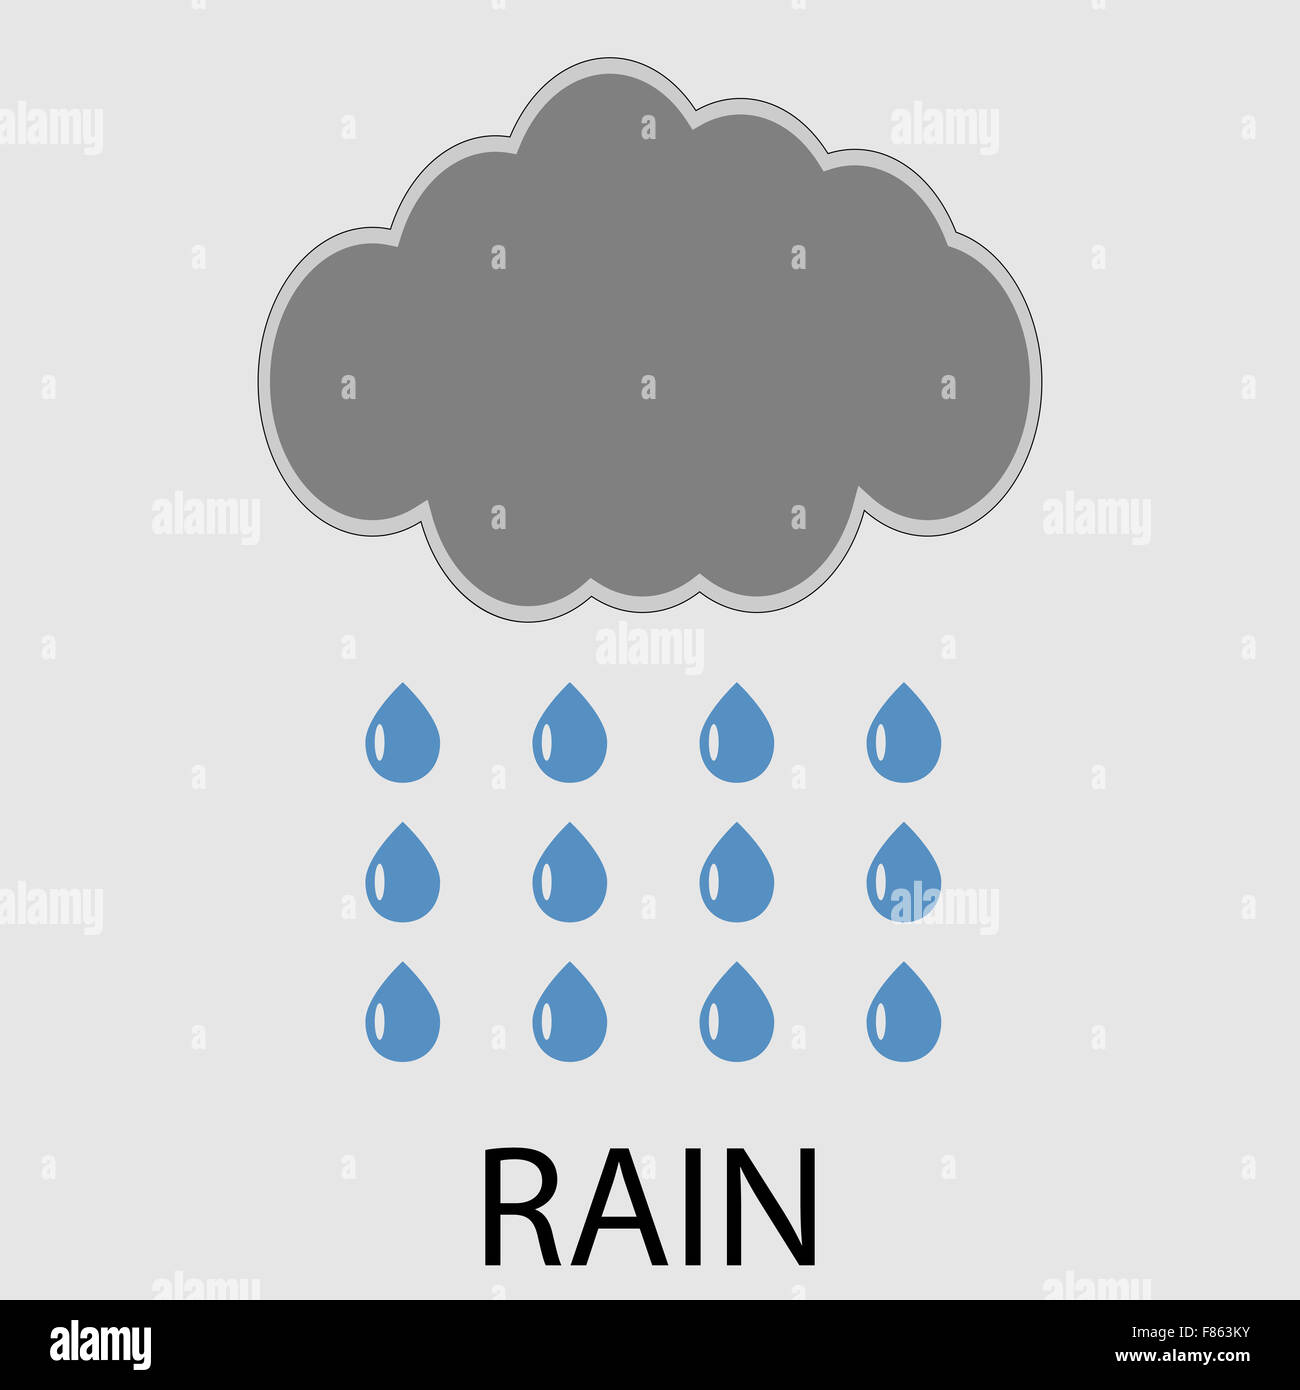 Rain icon weather. Cyclone and climatology, downpour and rainstorm, drizzle humidity, meteorology weather climate. Vector art de Stock Photo